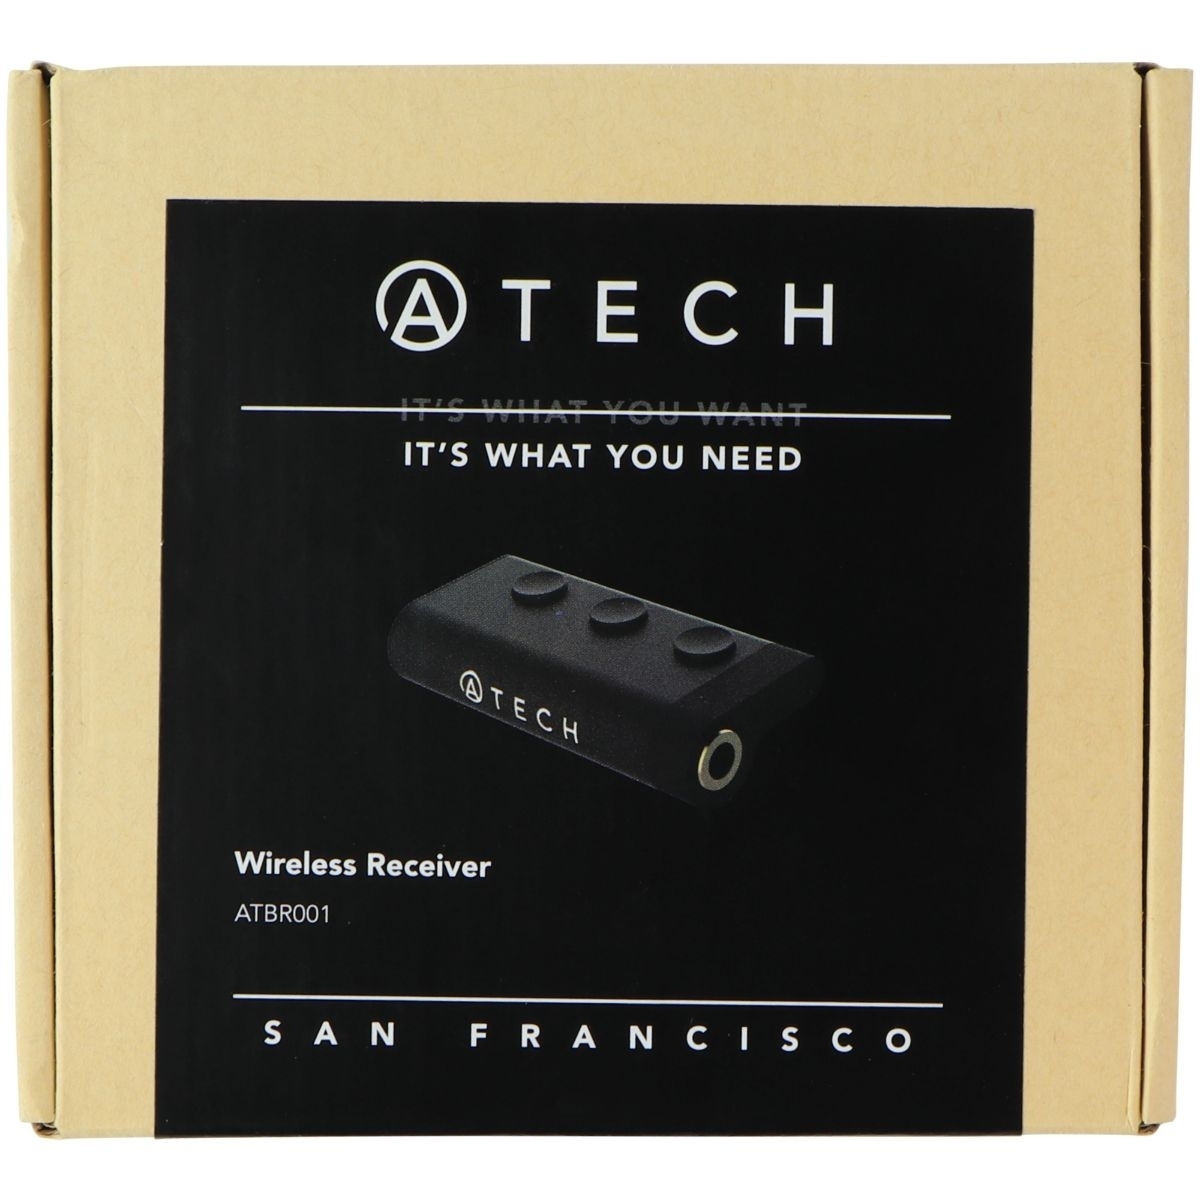 ATech Wireless Receiver For 3.5mm Devices - Black (ARBR001) (Refurbished)